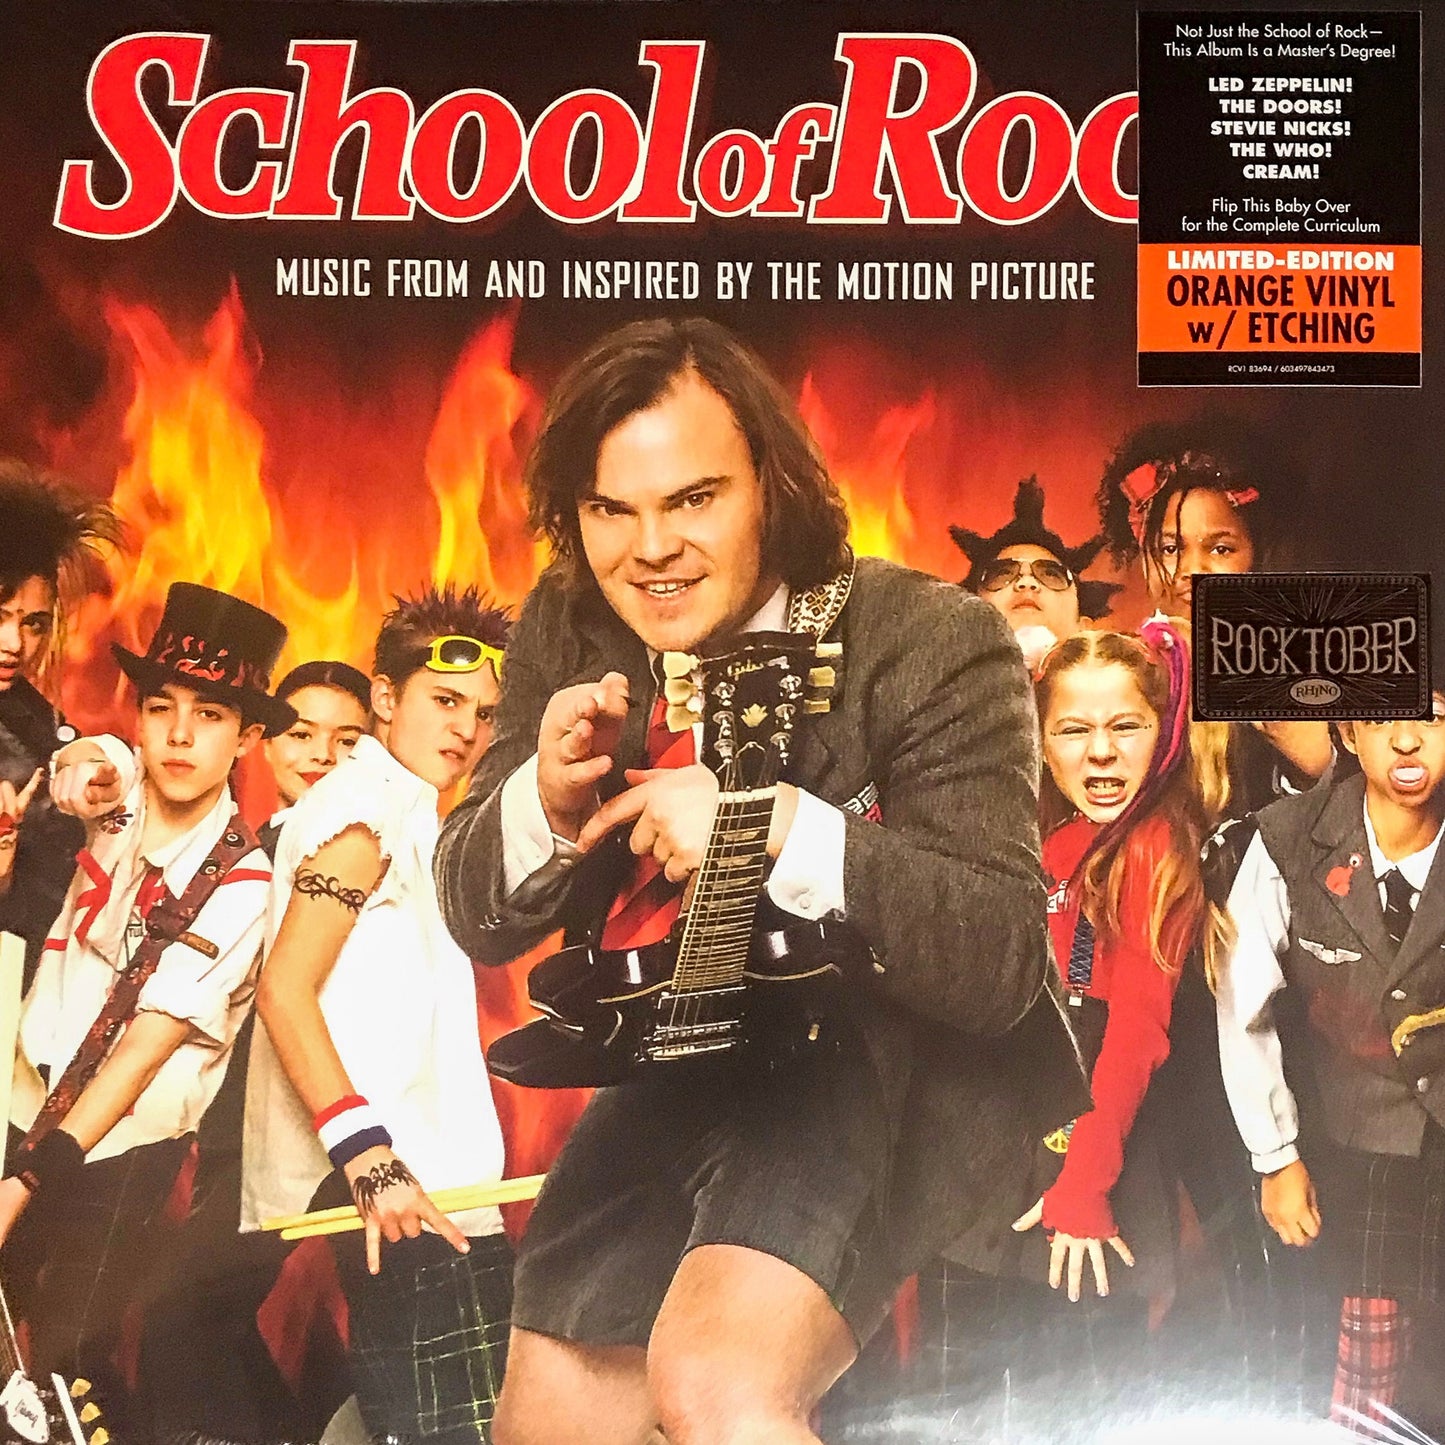 School of Rock: Music From & Inspired by The Motion Picture (Limited Edition 2XLP Orange Vinyl)